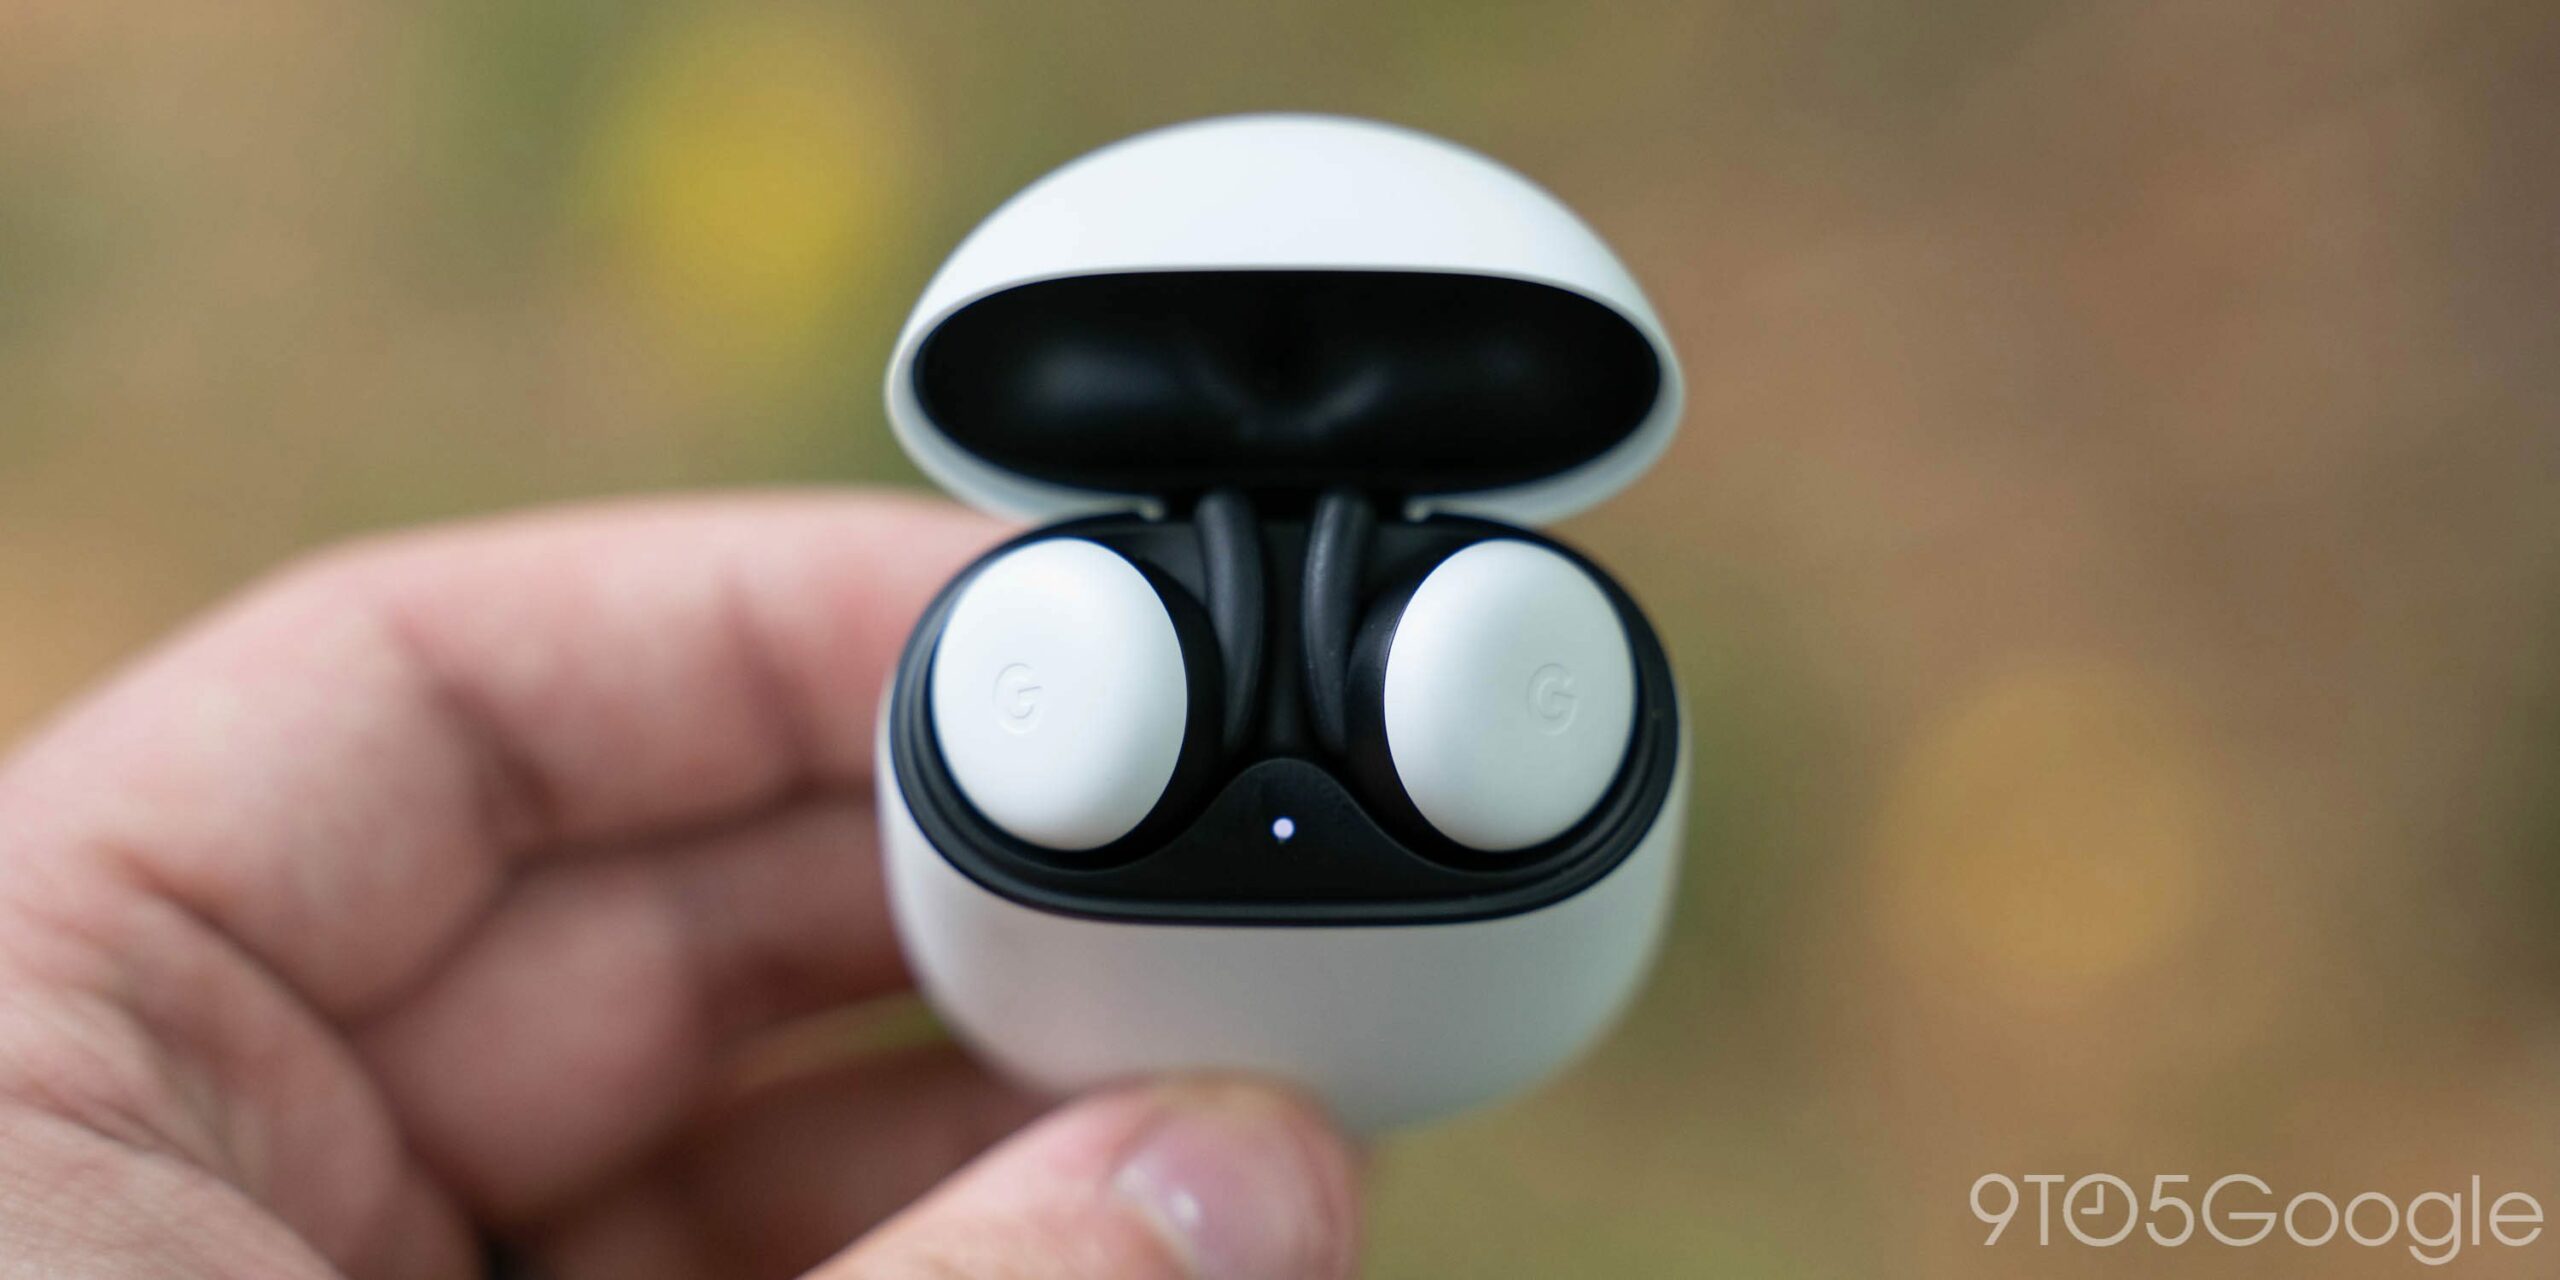 Pixel Buds selecting up new attributes, cutout fixes subsequent thirty day period